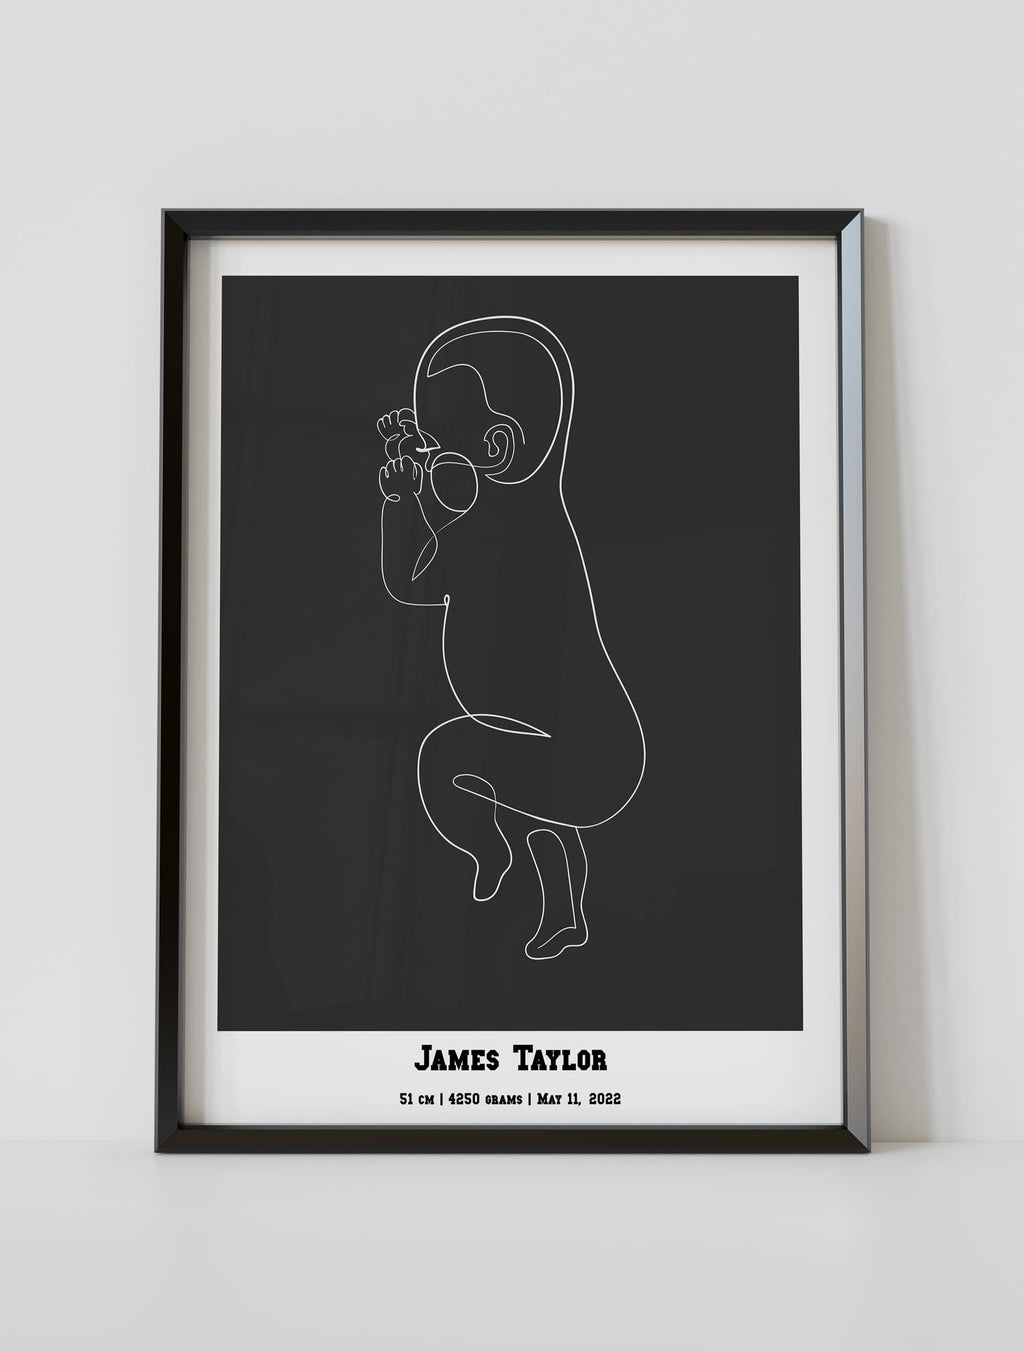 Black framed 1:1 scaled black baby birth poster by artmementos